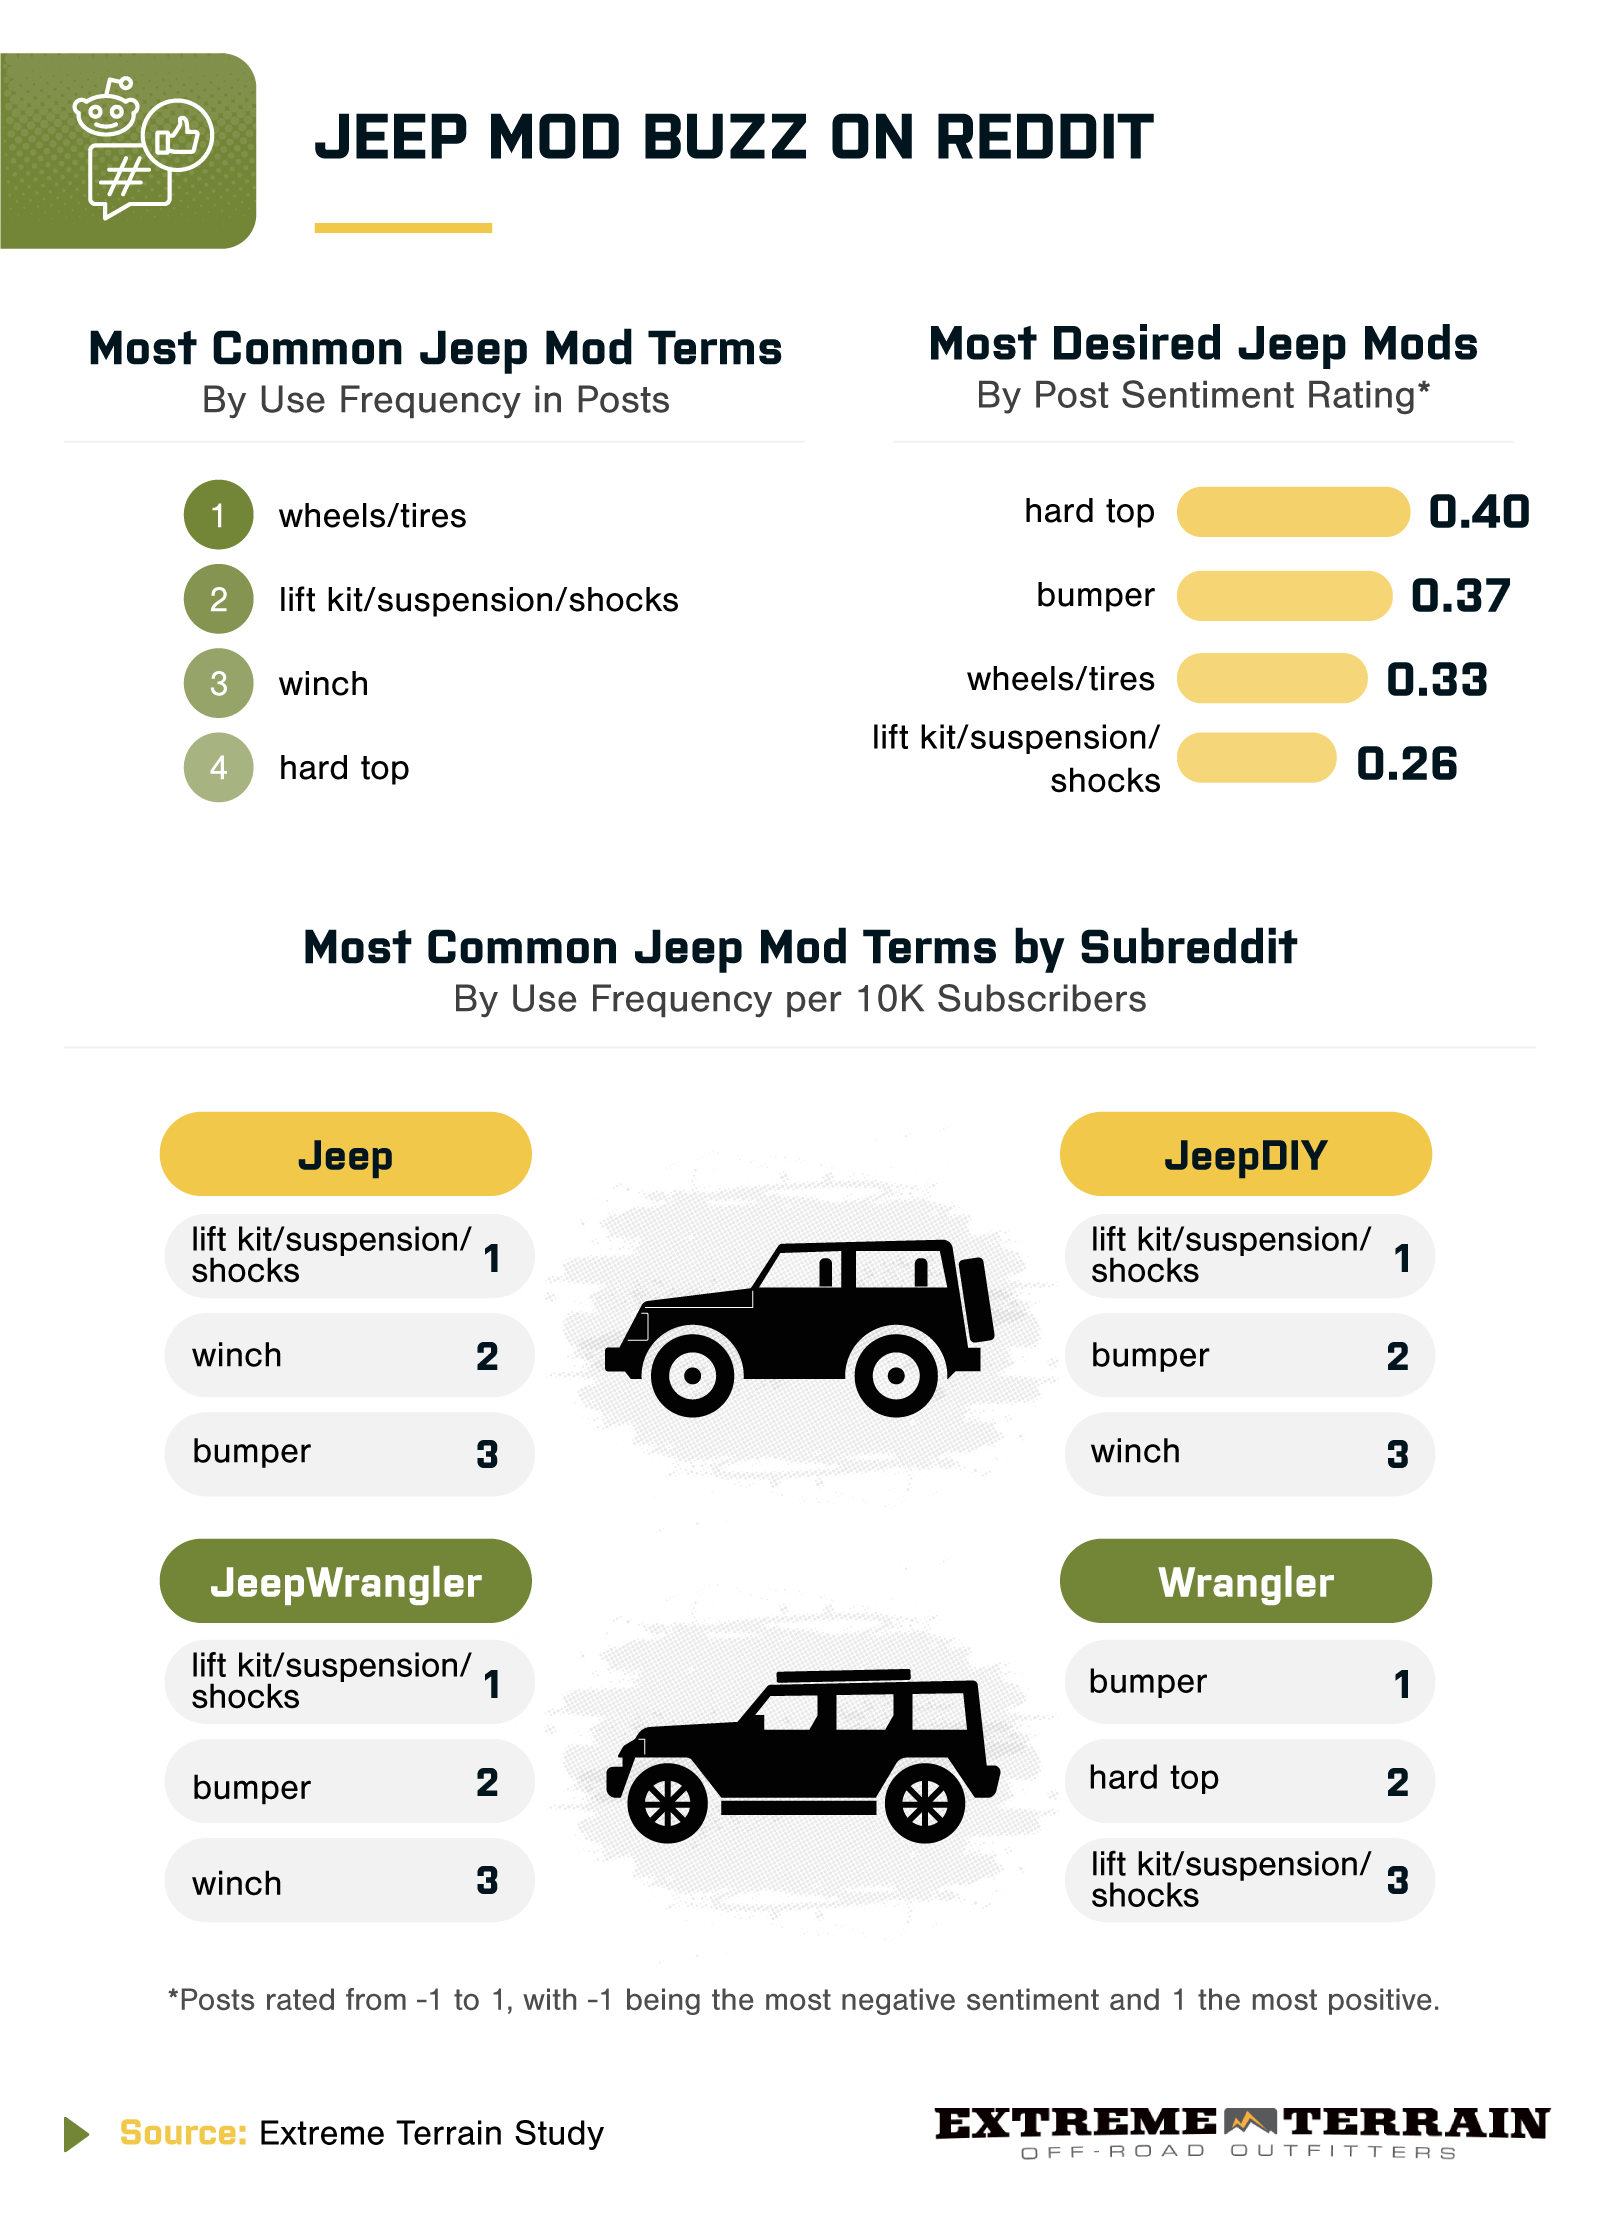 Infographic exploring the most desired jeep modifications based on online forums.